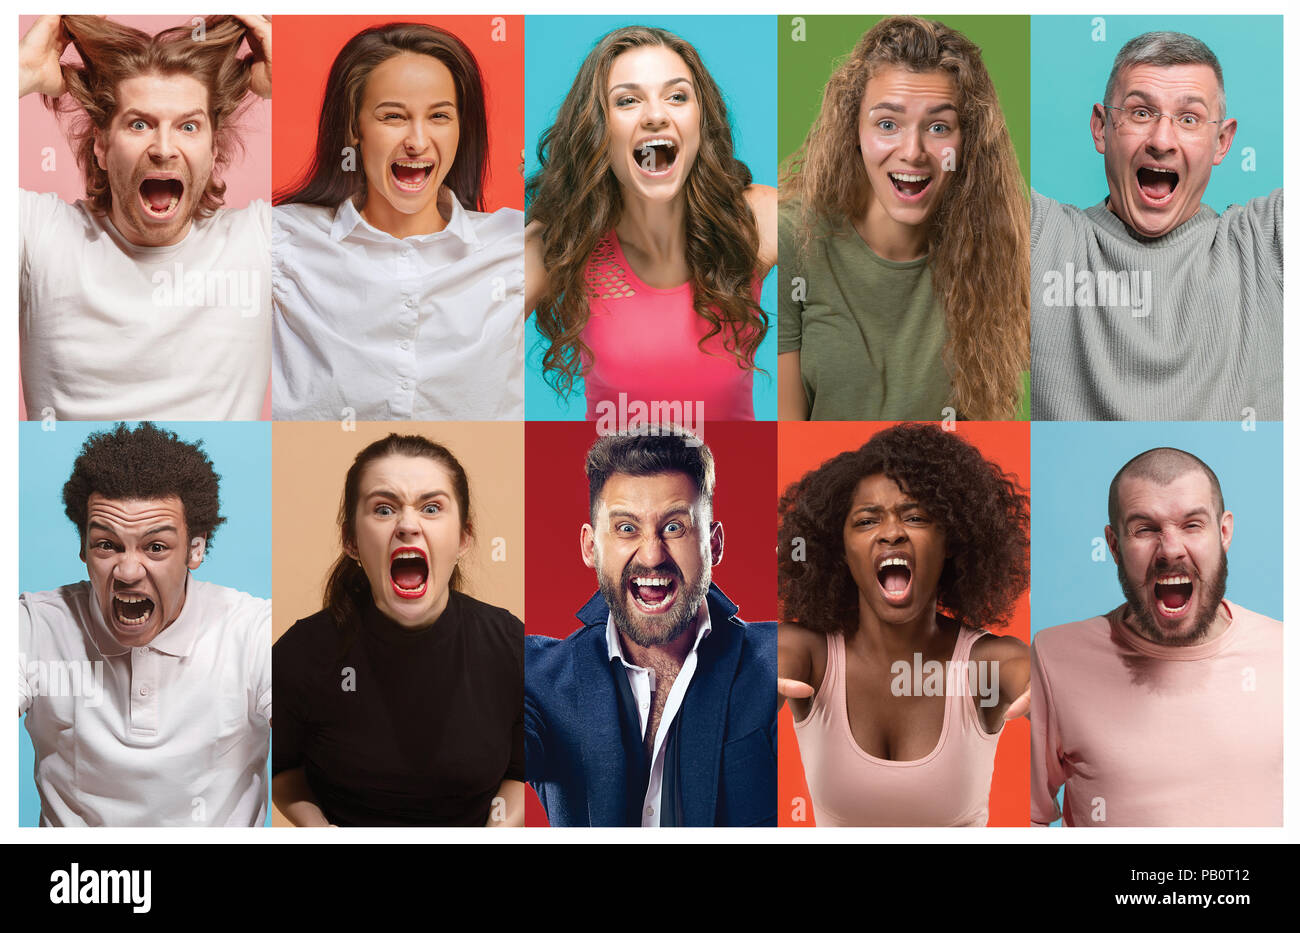 Angry people screaming. The collage of different human facial expressions, emotions and feelings of young men and women. Stock Photo